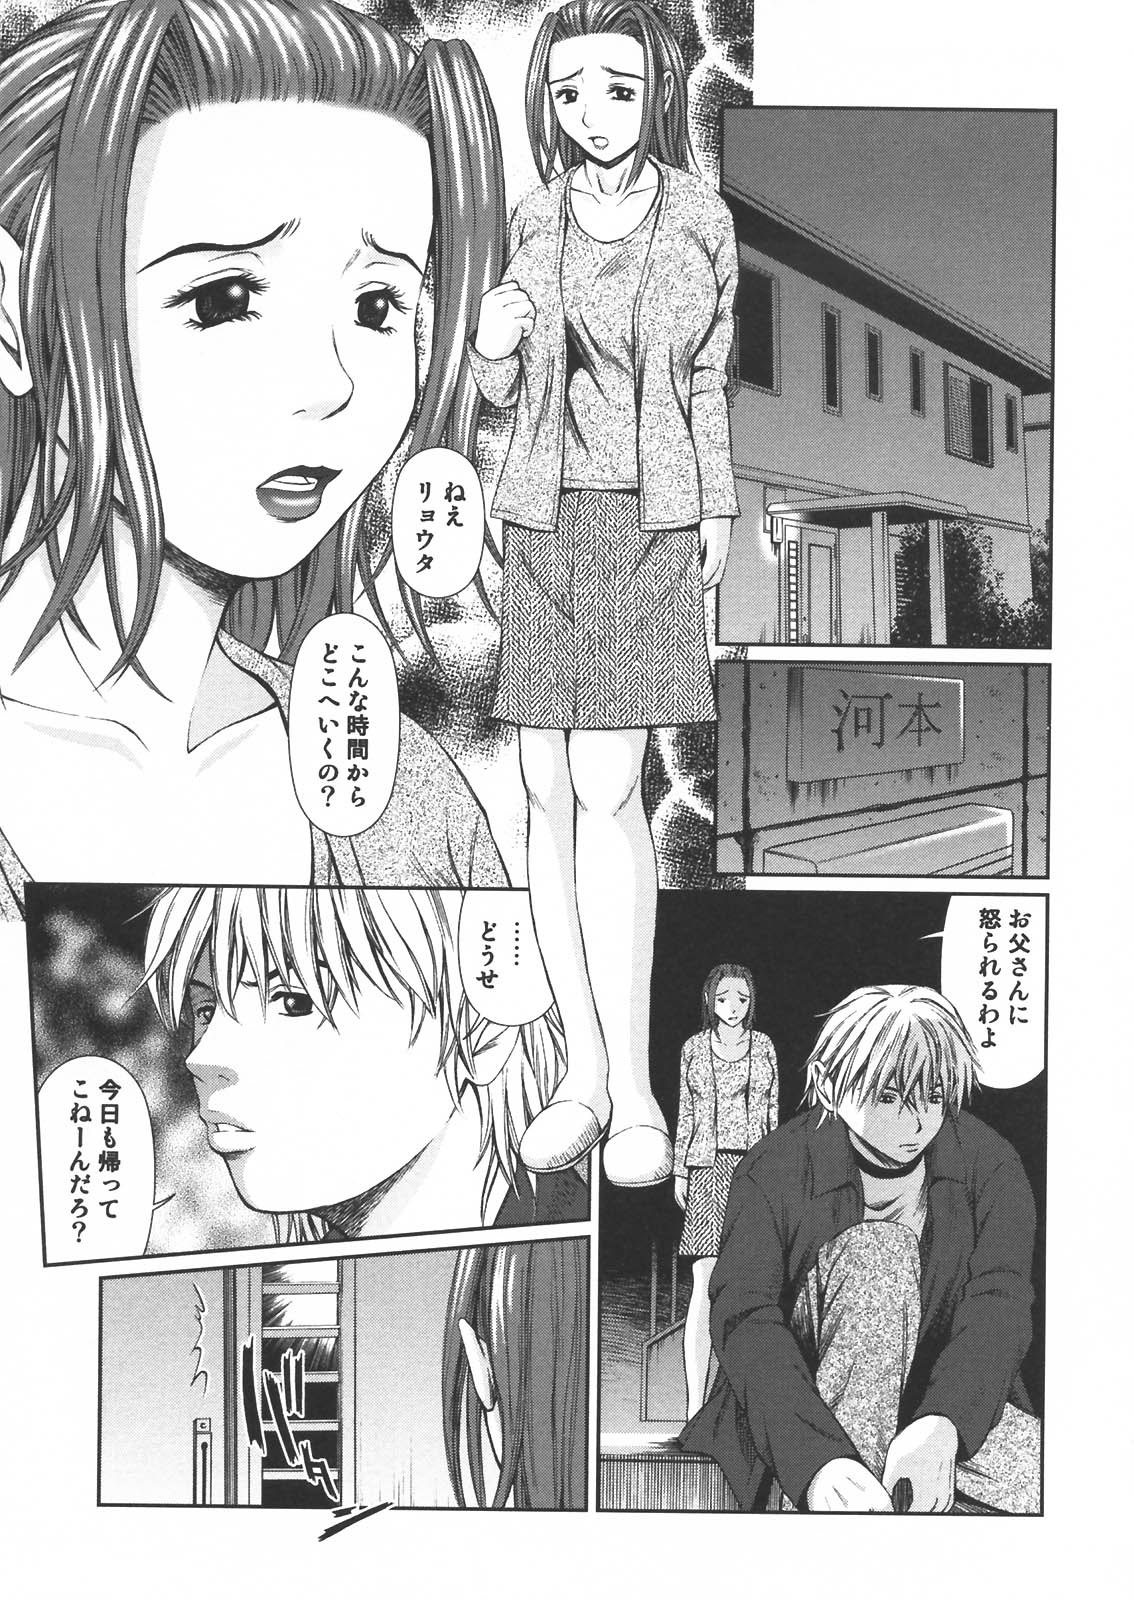 [Anthology] Haha to Ko no Inya - Mother's and son's indecent night - page 39 full